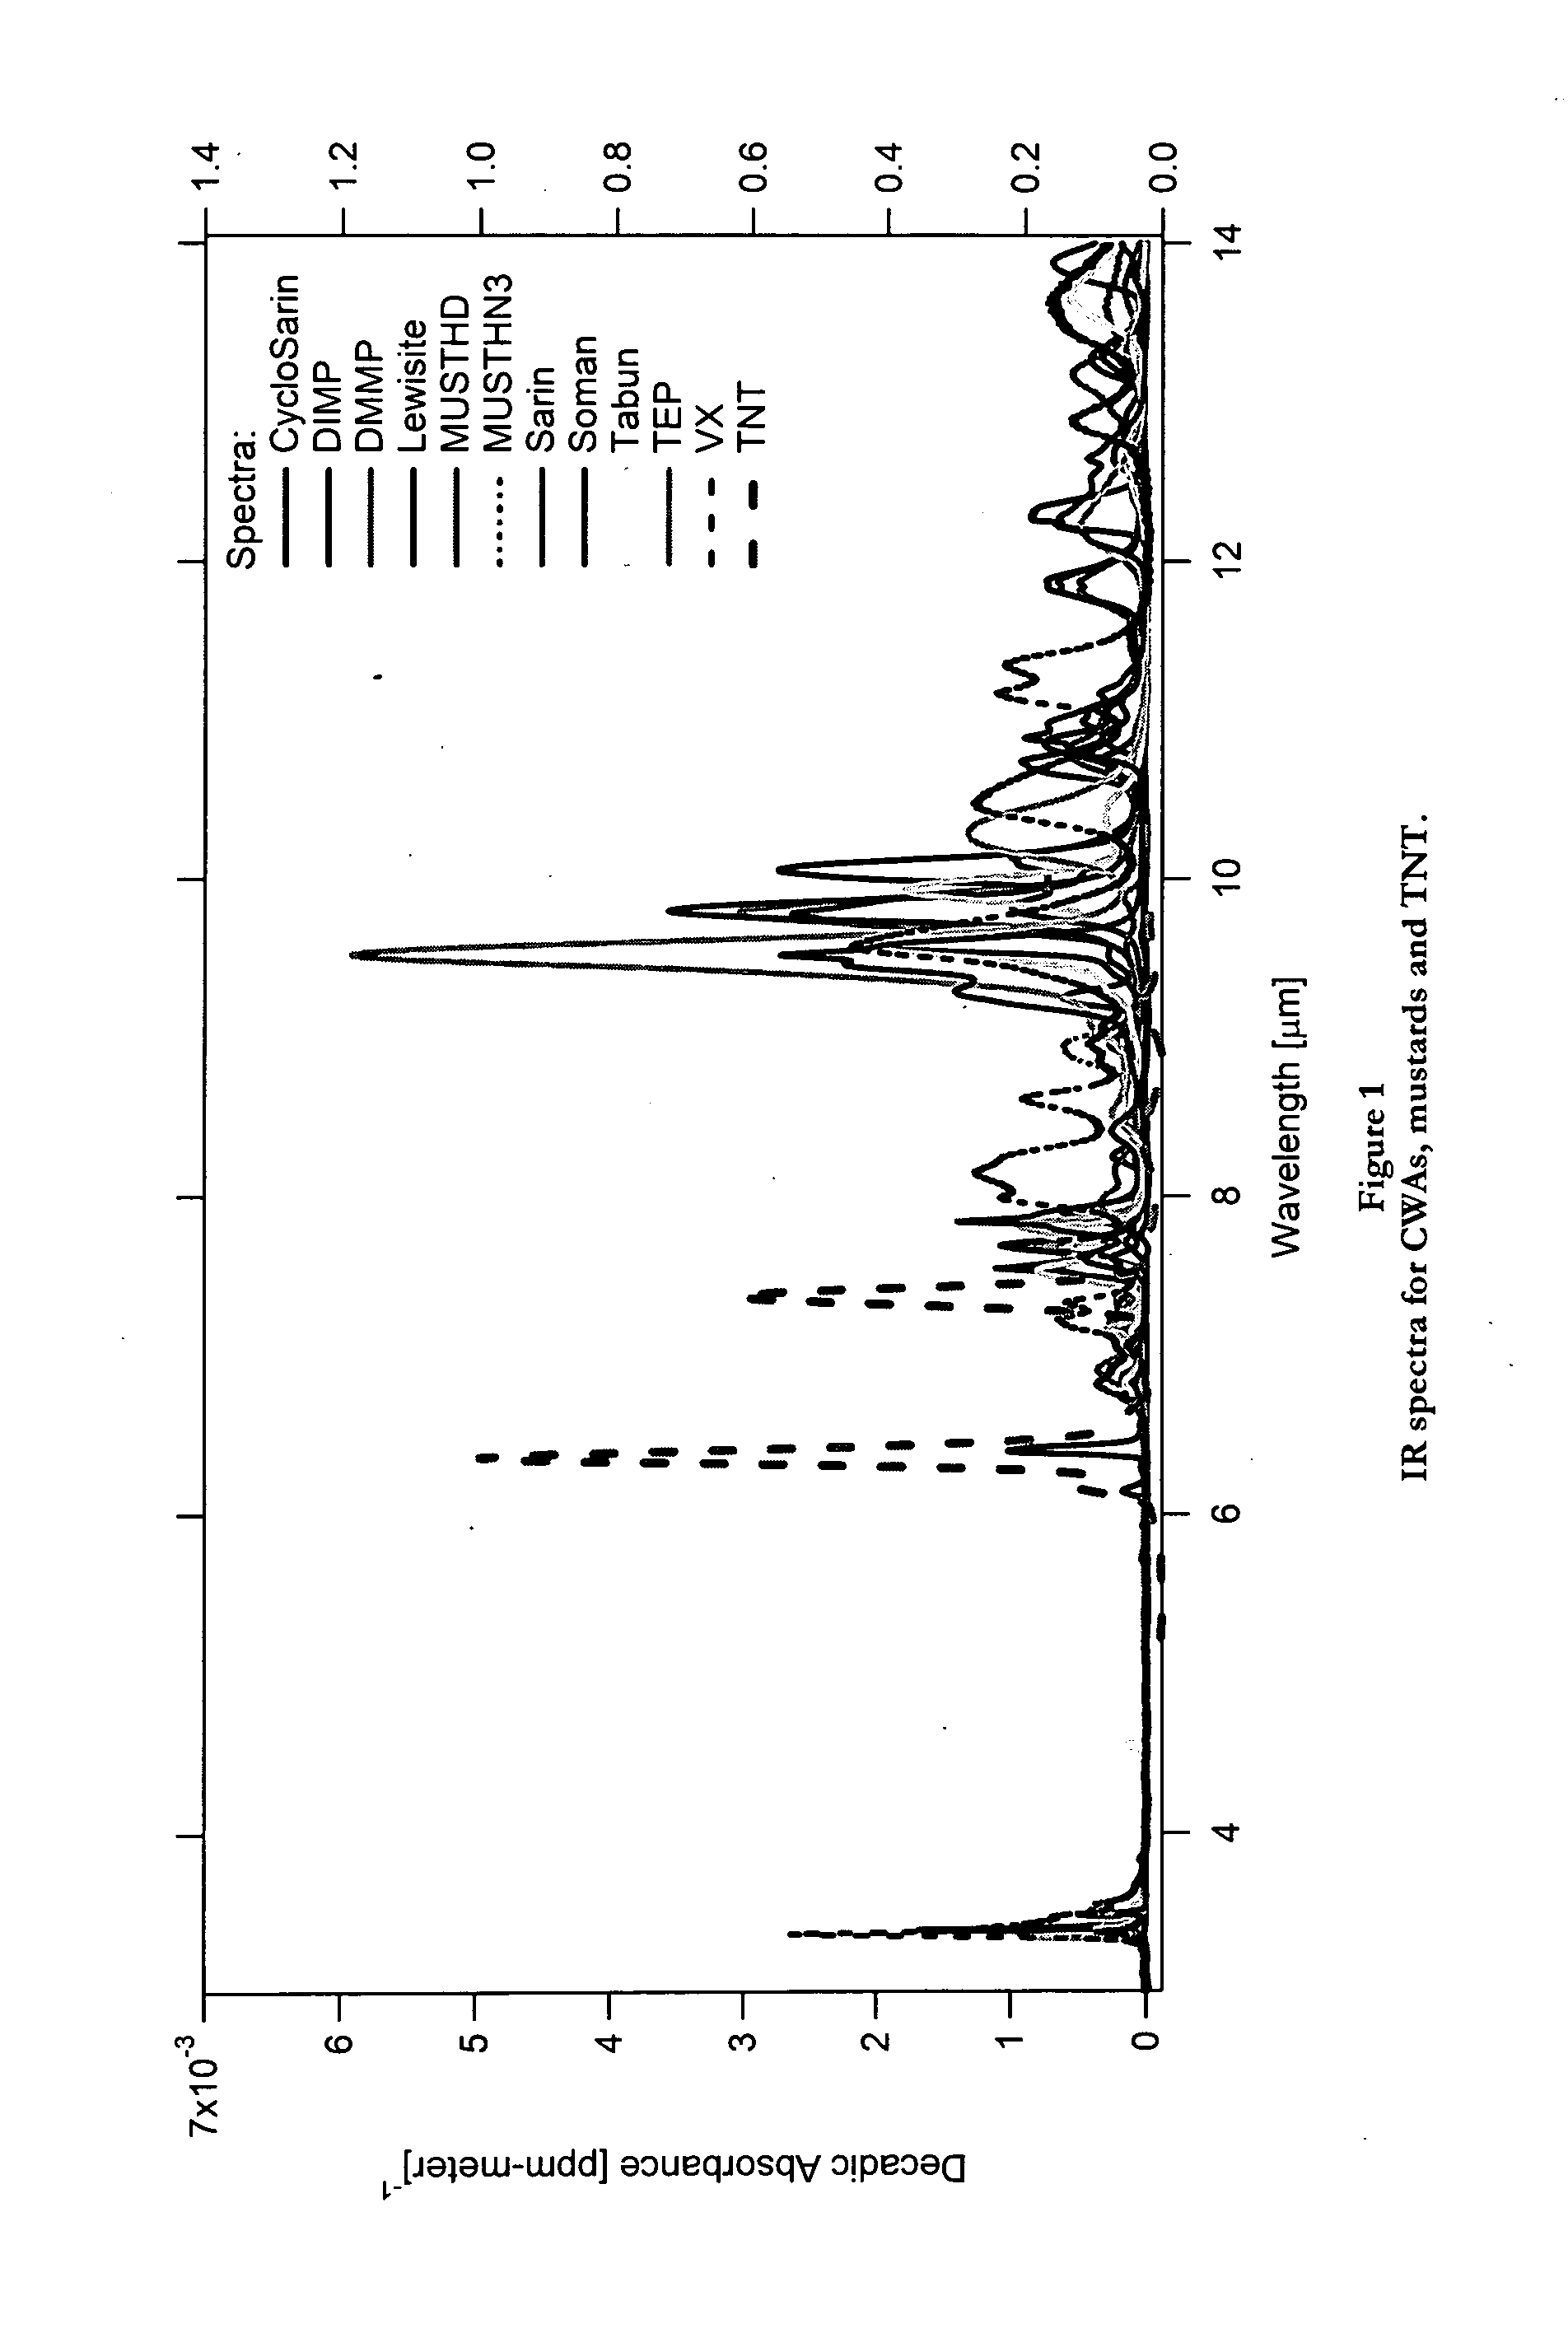 System and method for high sensitivity optical detection of gases